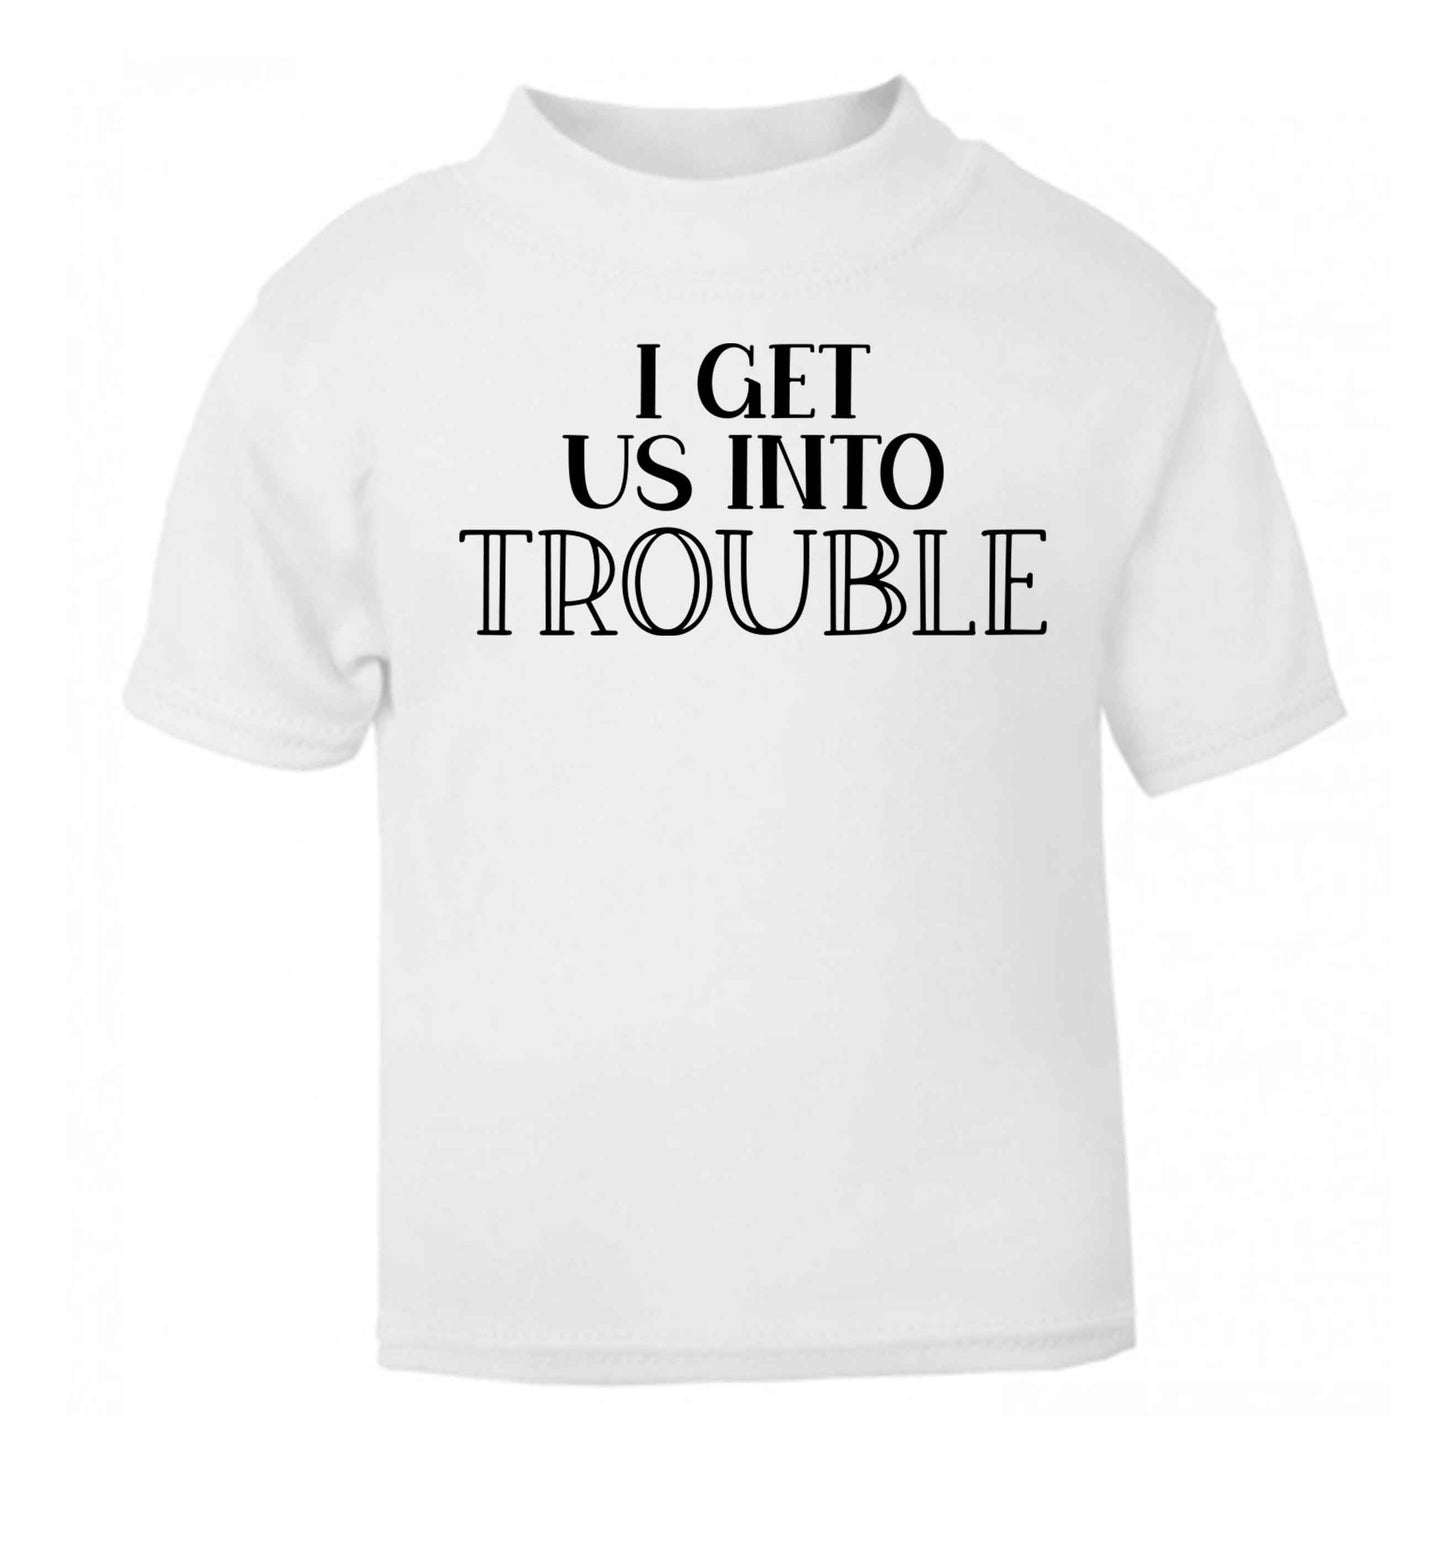 I get us into trouble white baby toddler Tshirt 2 Years